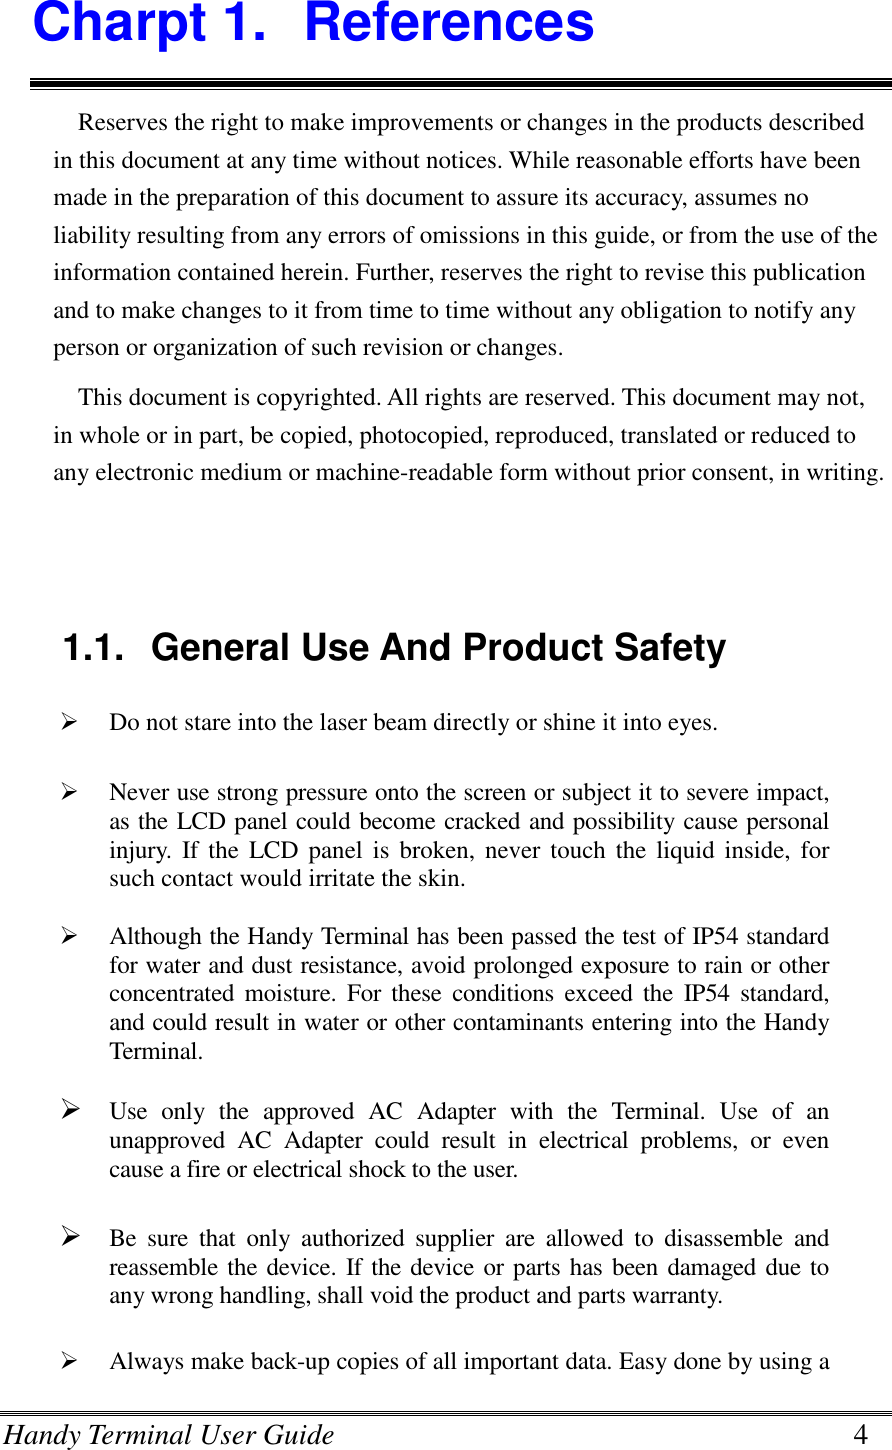 Handy Terminal User Guide      4 Charpt 1.  References Reserves the right to make improvements or changes in the products described in this document at any time without notices. While reasonable efforts have been made in the preparation of this document to assure its accuracy, assumes no liability resulting from any errors of omissions in this guide, or from the use of the information contained herein. Further, reserves the right to revise this publication and to make changes to it from time to time without any obligation to notify any person or organization of such revision or changes. This document is copyrighted. All rights are reserved. This document may not, in whole or in part, be copied, photocopied, reproduced, translated or reduced to any electronic medium or machine-readable form without prior consent, in writing.   1.1.  General Use And Product Safety  Do not stare into the laser beam directly or shine it into eyes.   Never use strong pressure onto the screen or subject it to severe impact, as the LCD panel could become cracked and possibility cause personal injury. If the  LCD panel  is broken,  never  touch the liquid inside, for such contact would irritate the skin.   Although the Handy Terminal has been passed the test of IP54 standard for water and dust resistance, avoid prolonged exposure to rain or other concentrated moisture.  For these  conditions exceed  the  IP54  standard, and could result in water or other contaminants entering into the Handy Terminal.   Use  only  the  approved  AC  Adapter  with  the  Terminal.  Use  of  an unapproved  AC  Adapter  could  result  in  electrical  problems,  or  even cause a fire or electrical shock to the user.   Be  sure  that  only  authorized  supplier  are  allowed  to  disassemble  and reassemble the device. If the device or parts has been damaged due to any wrong handling, shall void the product and parts warranty.   Always make back-up copies of all important data. Easy done by using a 